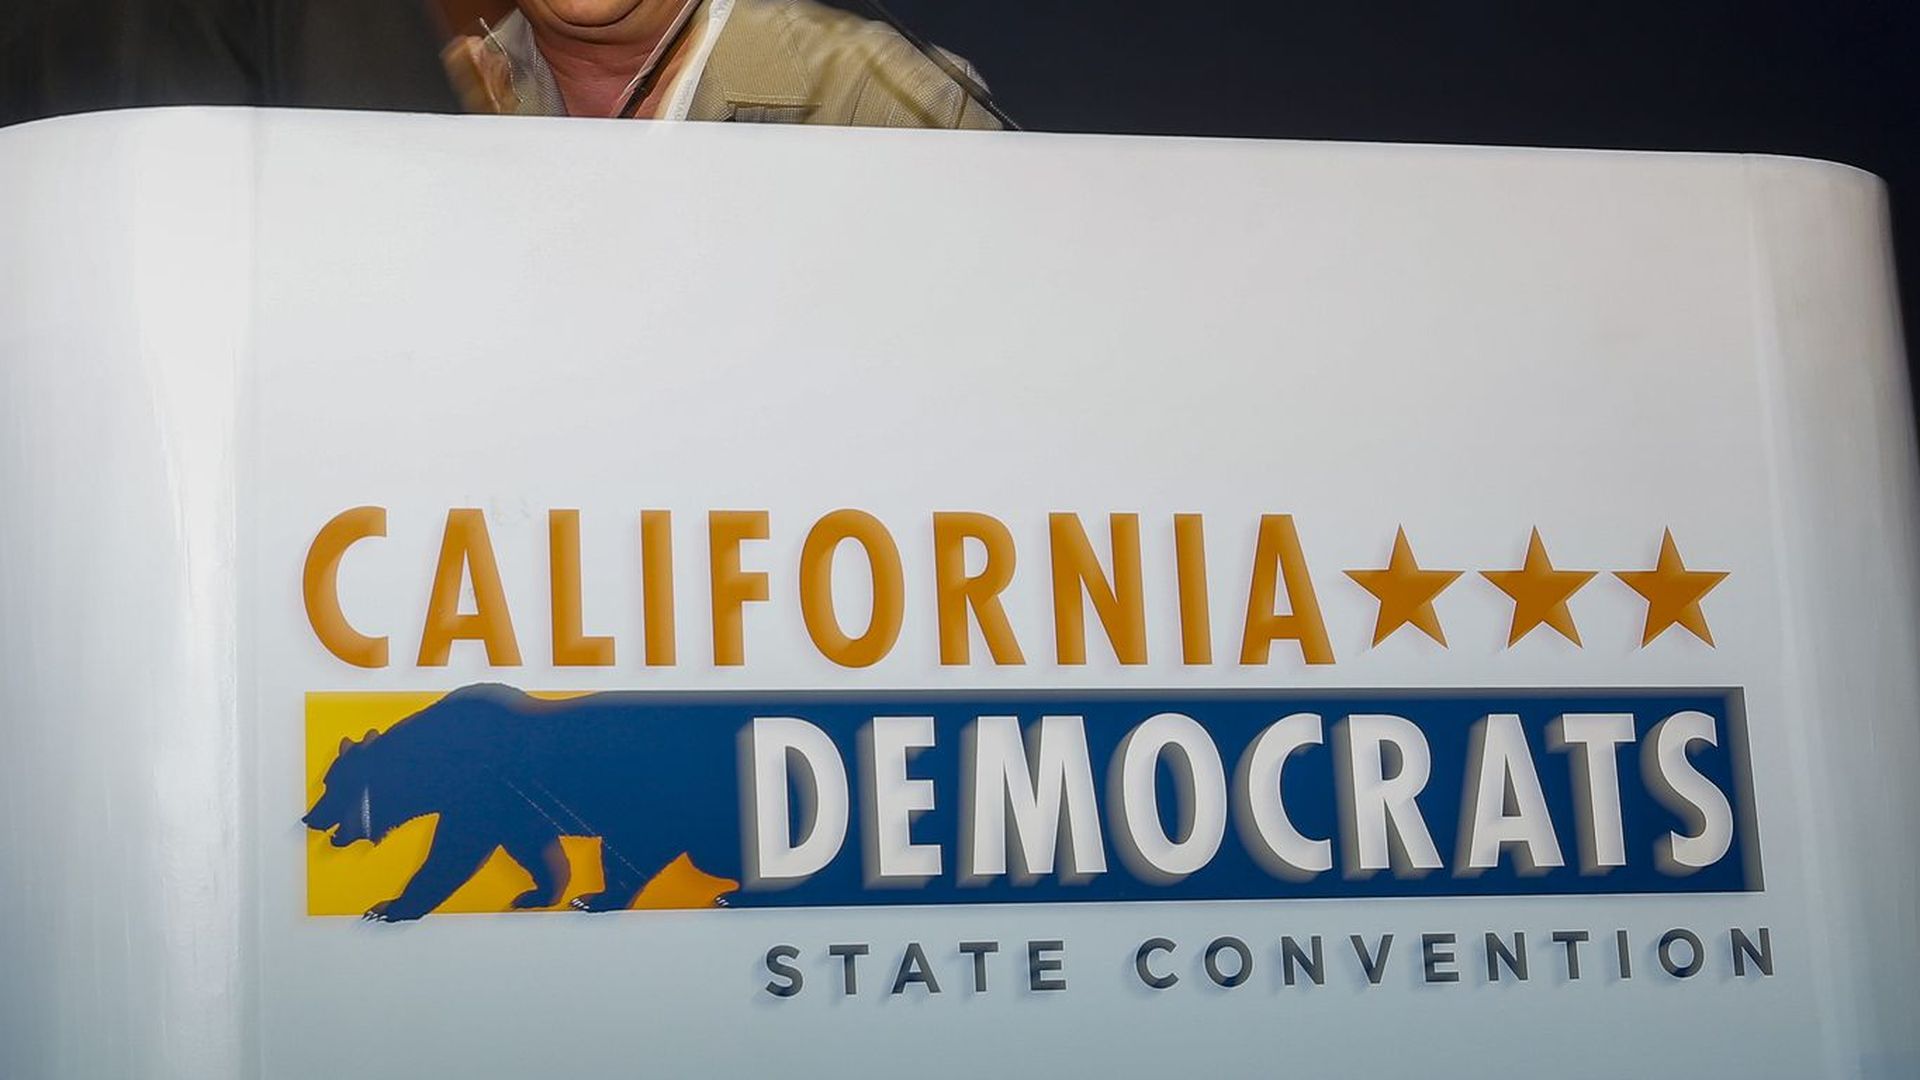 California Democratic State Convention, at the Convention Center in downtown Sacramento, CA., 